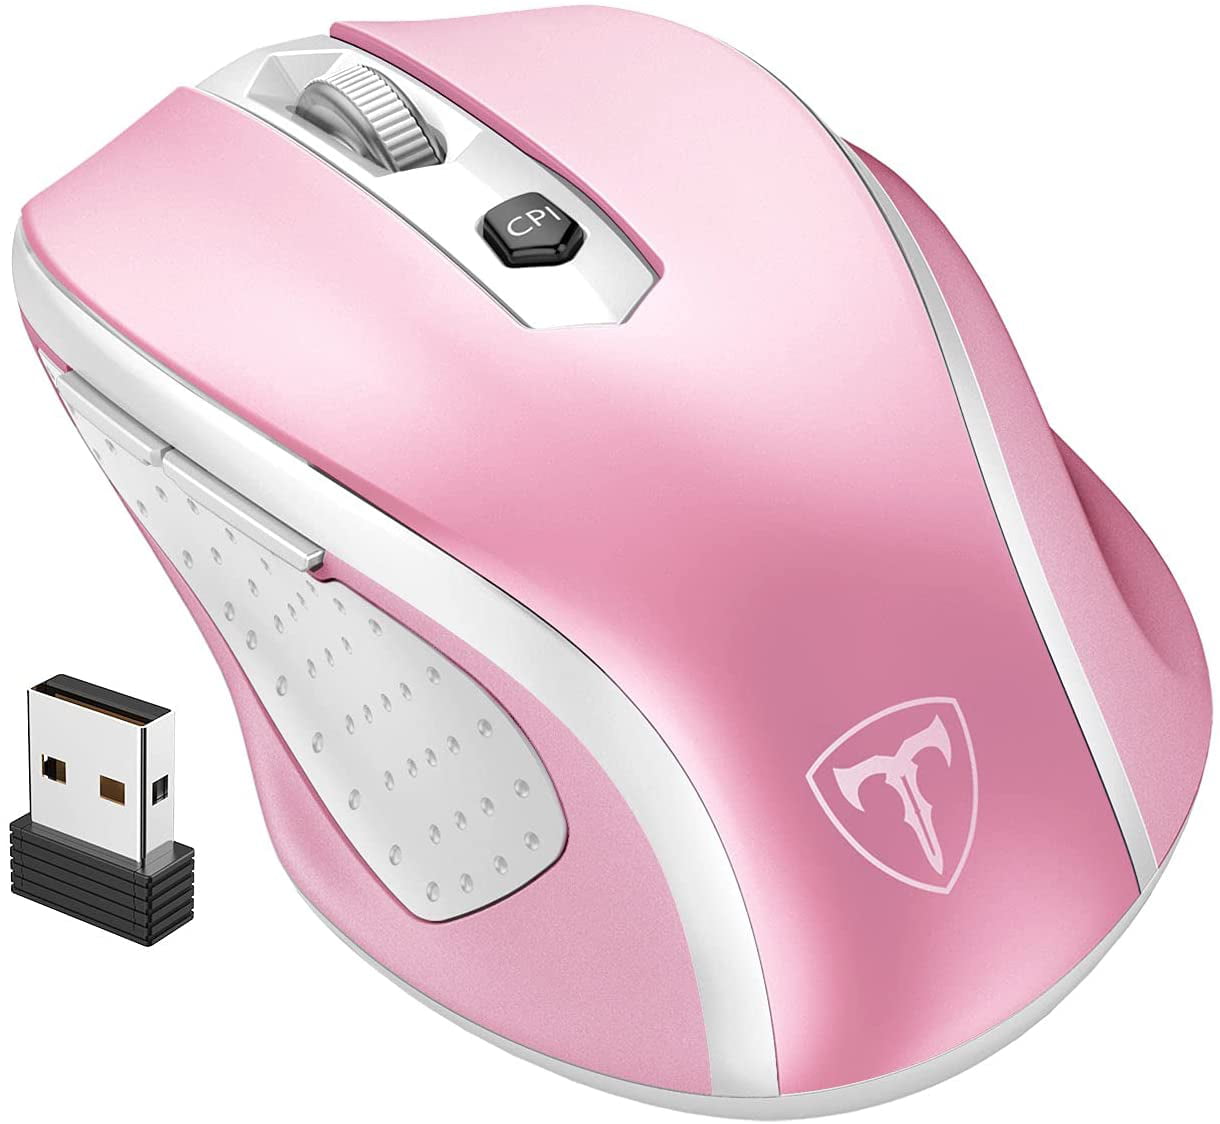 5 Adjustable DPI Levels MacBook VicTsing MM057 2.4G Wireless Portable Mobile Mouse Optical Mice with USB Receiver Pink Laptop 6 Buttons for Notebook Computer PC